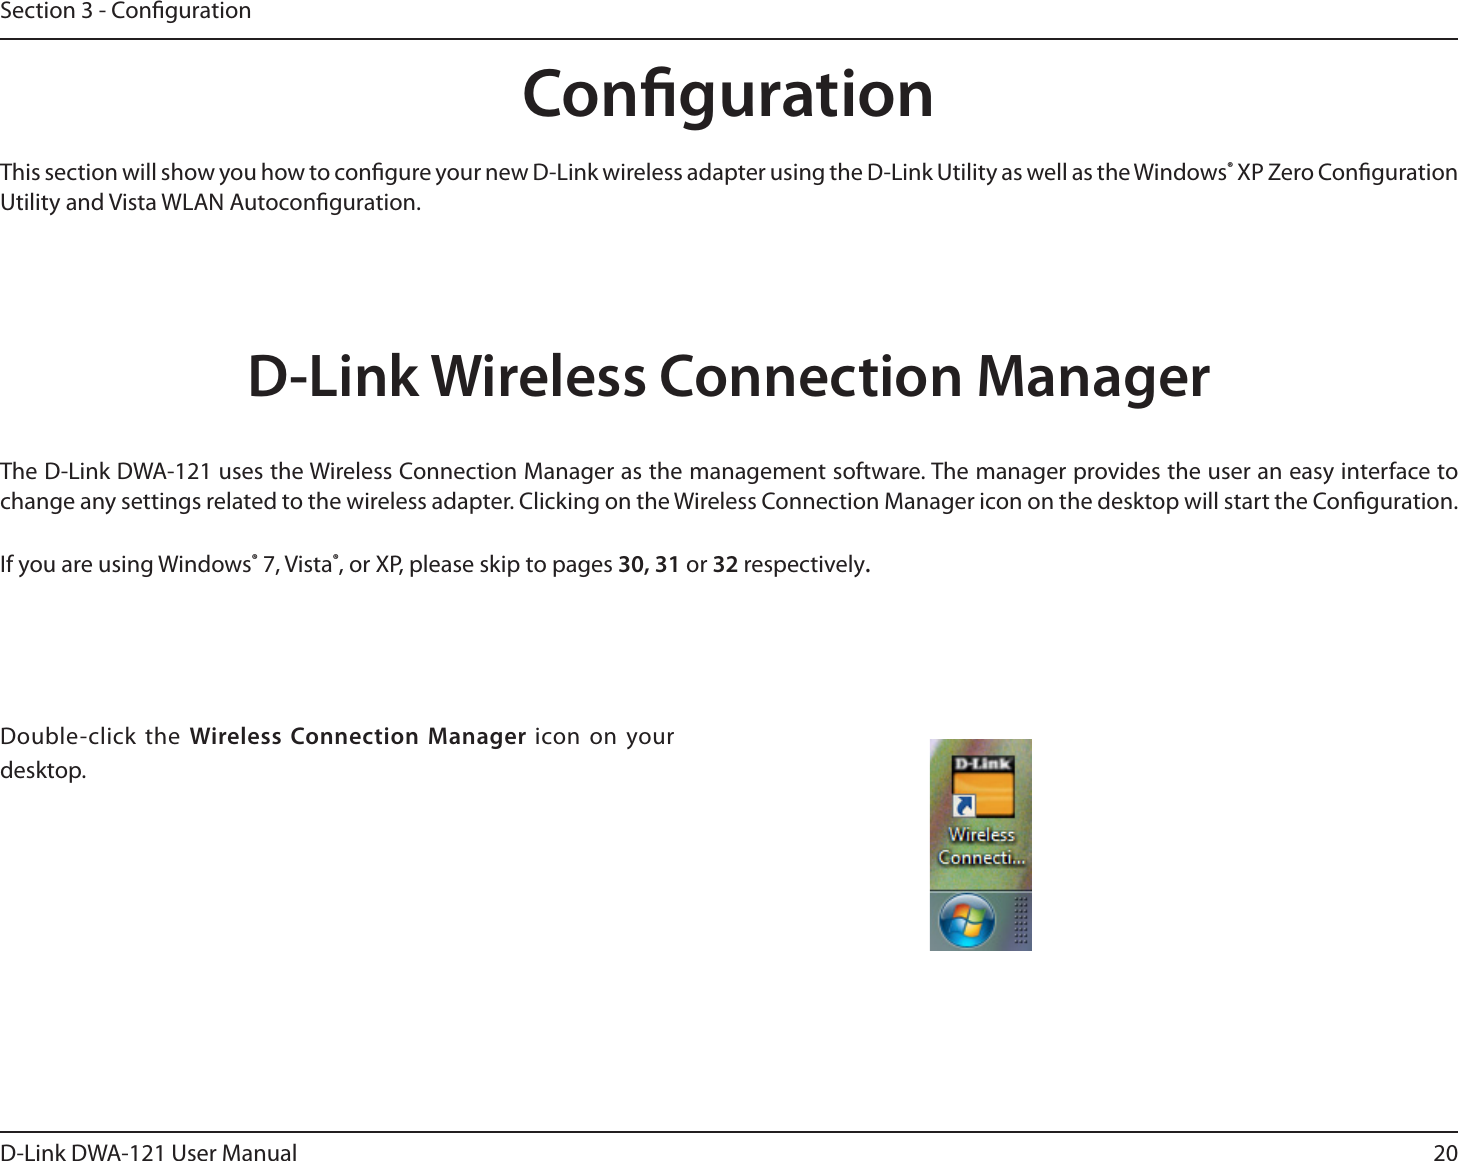 20D-Link DWA-121 User ManualSection 3 - CongurationCongurationThis section will show you how to congure your new D-Link wireless adapter using the D-Link Utility as well as the Windows® XP Zero Conguration Utility and Vista WLAN Autoconguration.D-Link Wireless Connection ManagerThe D-Link DWA-121 uses the Wireless Connection Manager as the management software. The manager provides the user an easy interface to change any settings related to the wireless adapter. Clicking on the Wireless Connection Manager icon on the desktop will start the Conguration.If you are using Windows® 7, Vista®, or XP, please skip to pages 30, 31 or 32 respectively.Double-click the Wireless Connection Manager icon on your desktop.